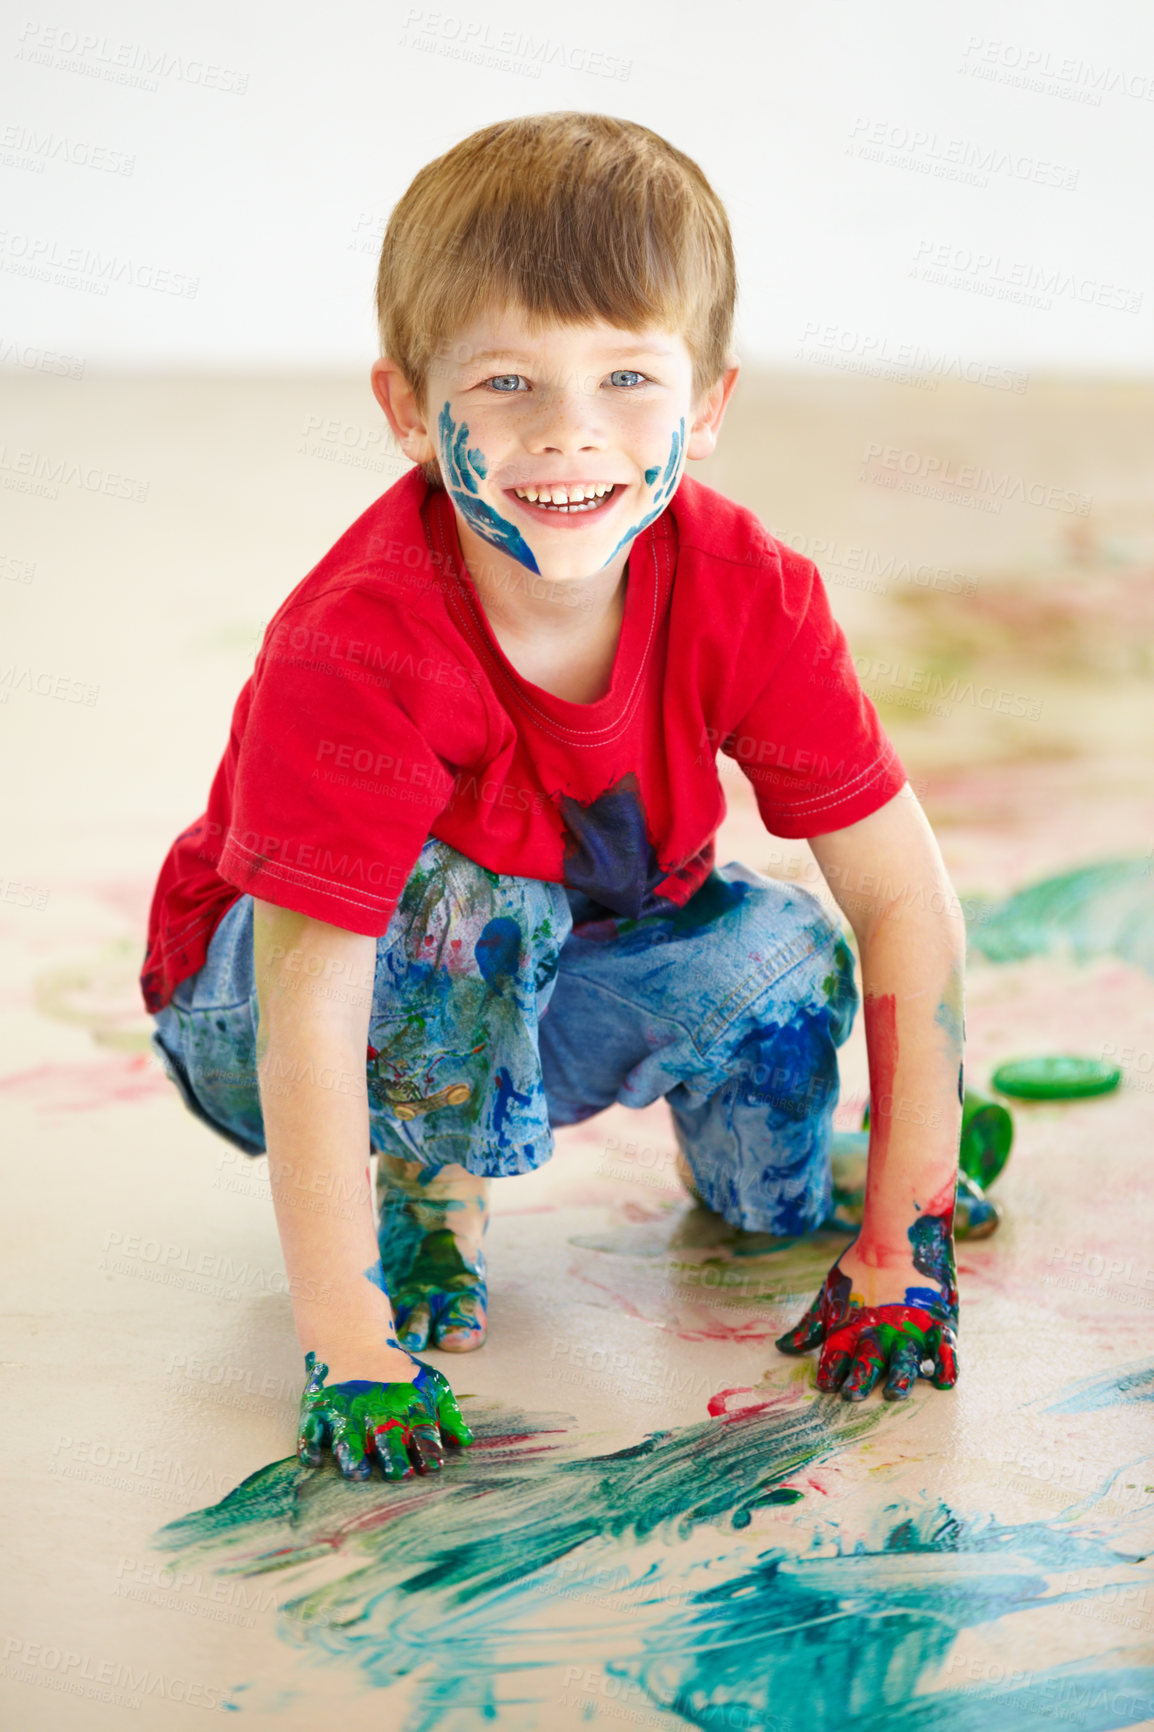 Buy stock photo Portrait, smile and a boy painting on the floor of a studio for creative expression or education at school. Art, paint and an excited young child looking happy with his messy artistic creativity